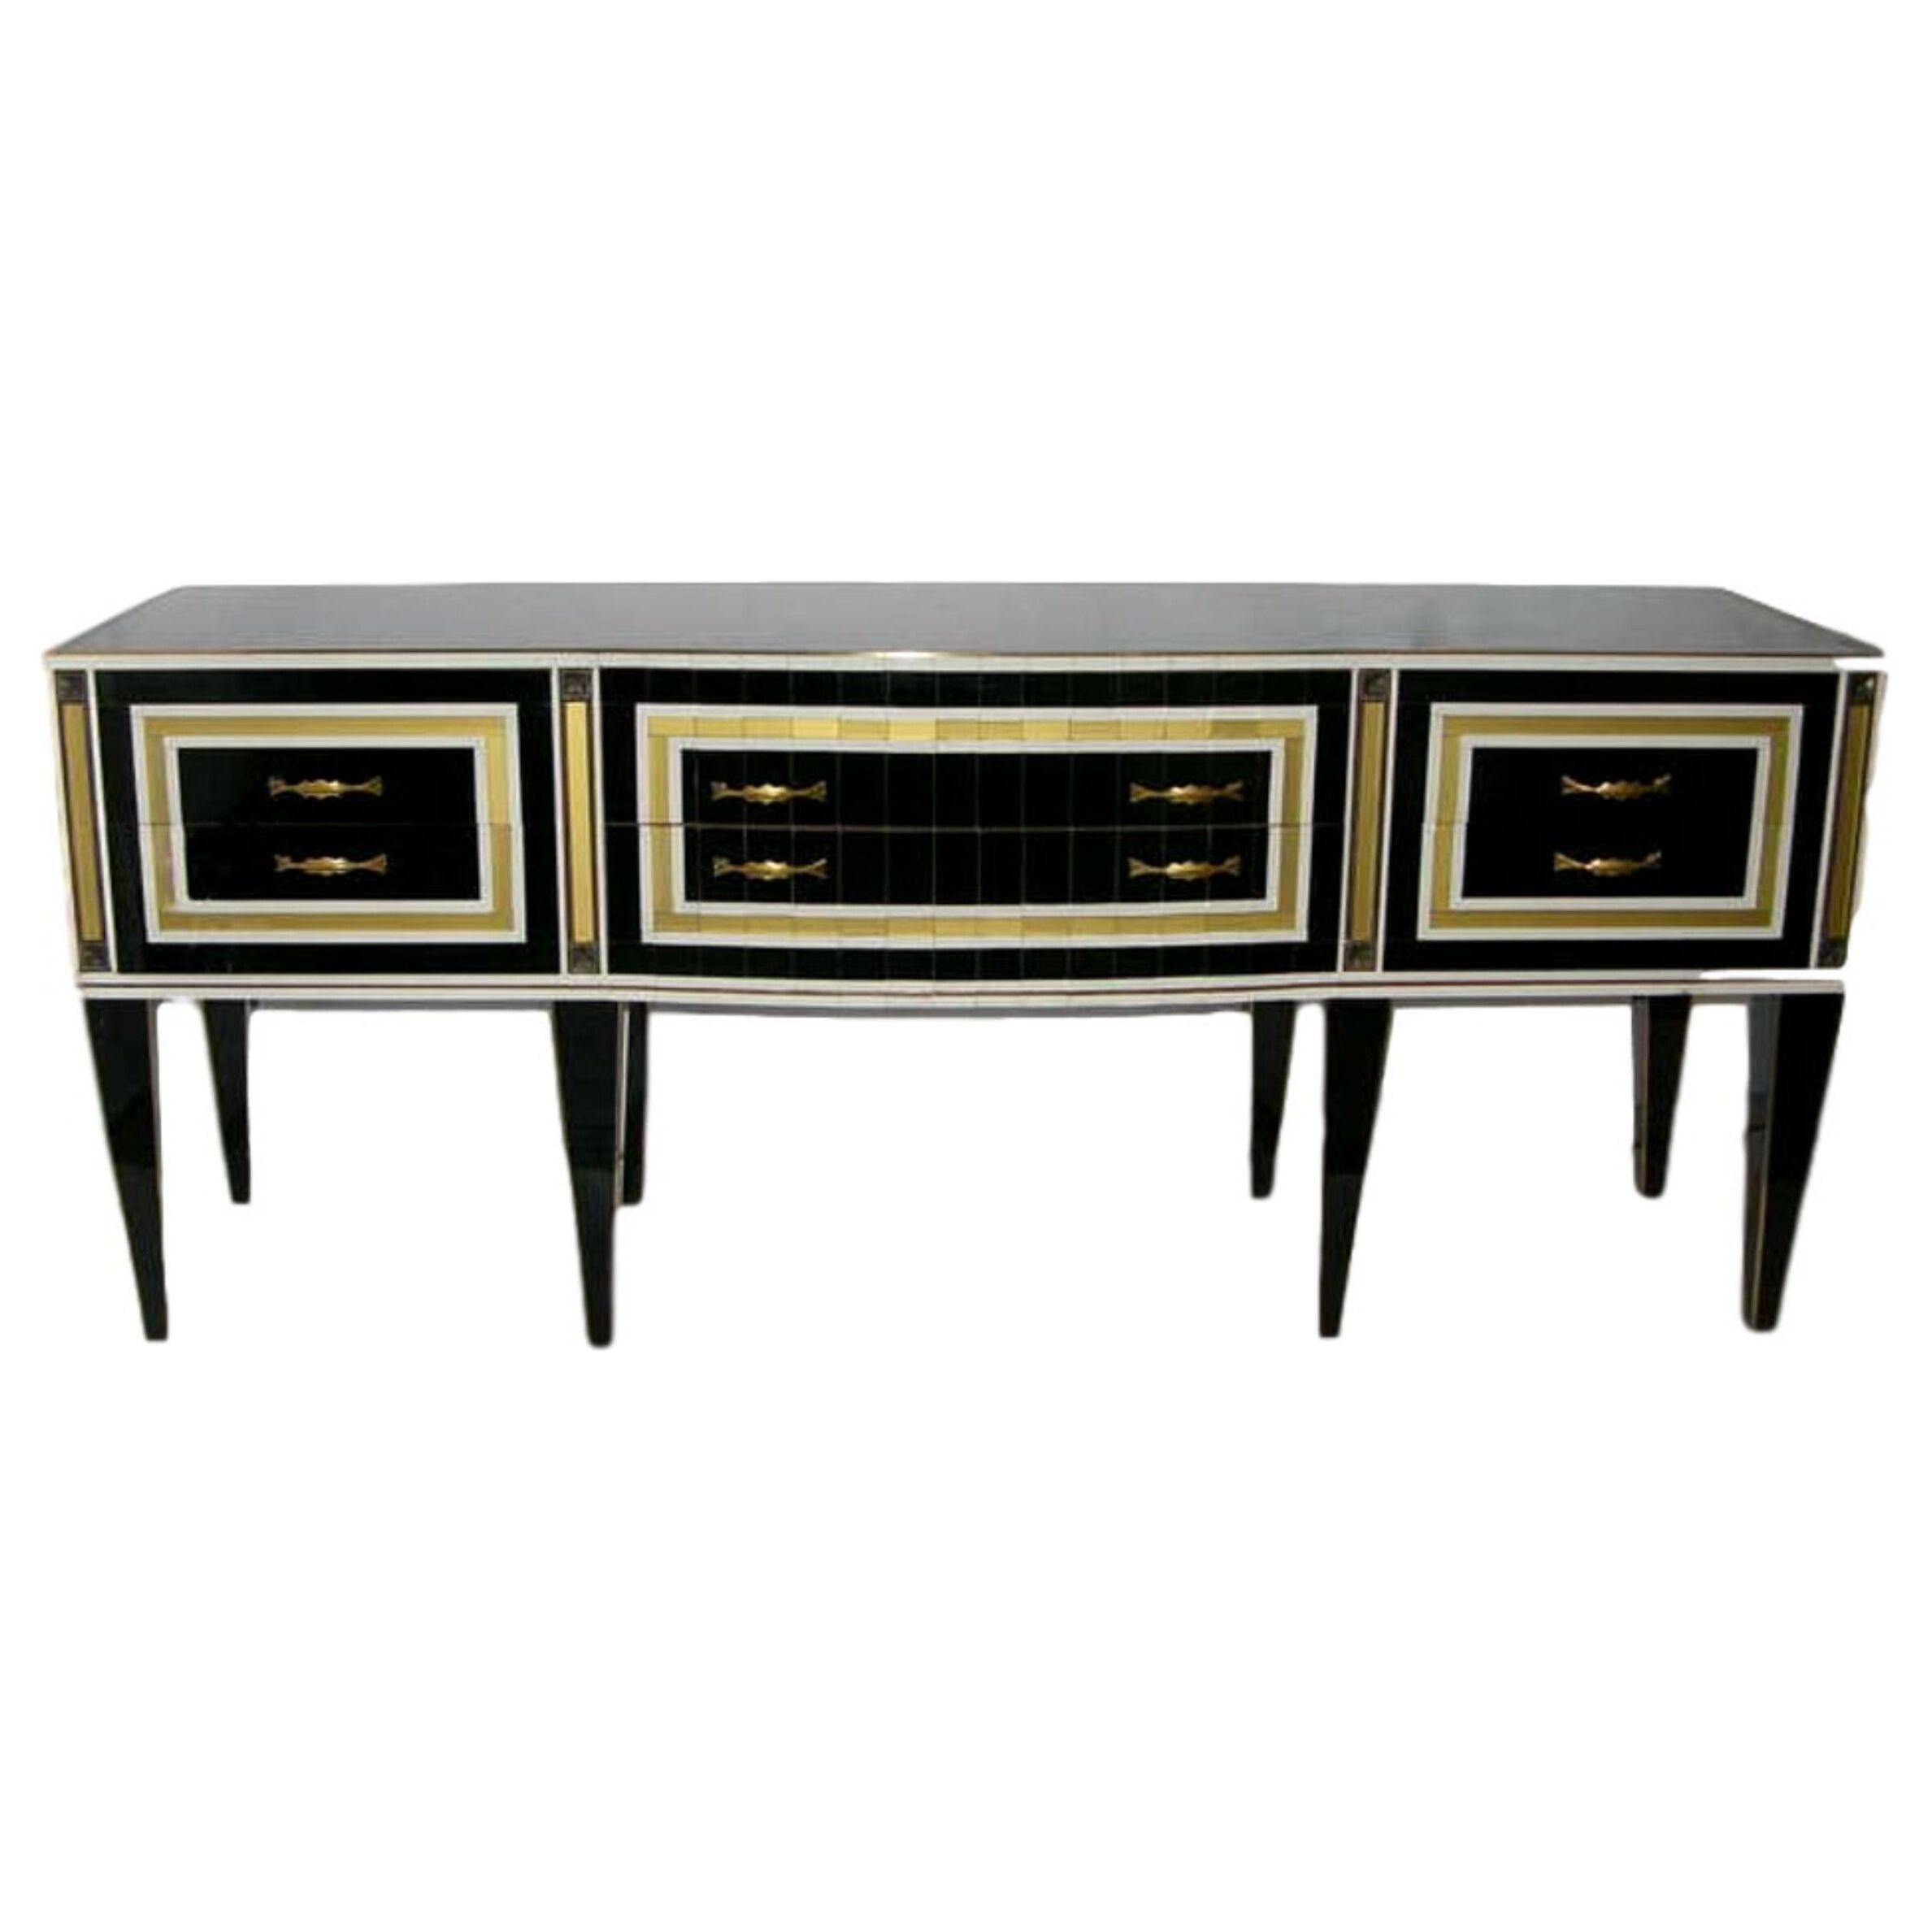 1950s Italian Art Deco Style Black Glass Sideboard with White and Bronze Insets	